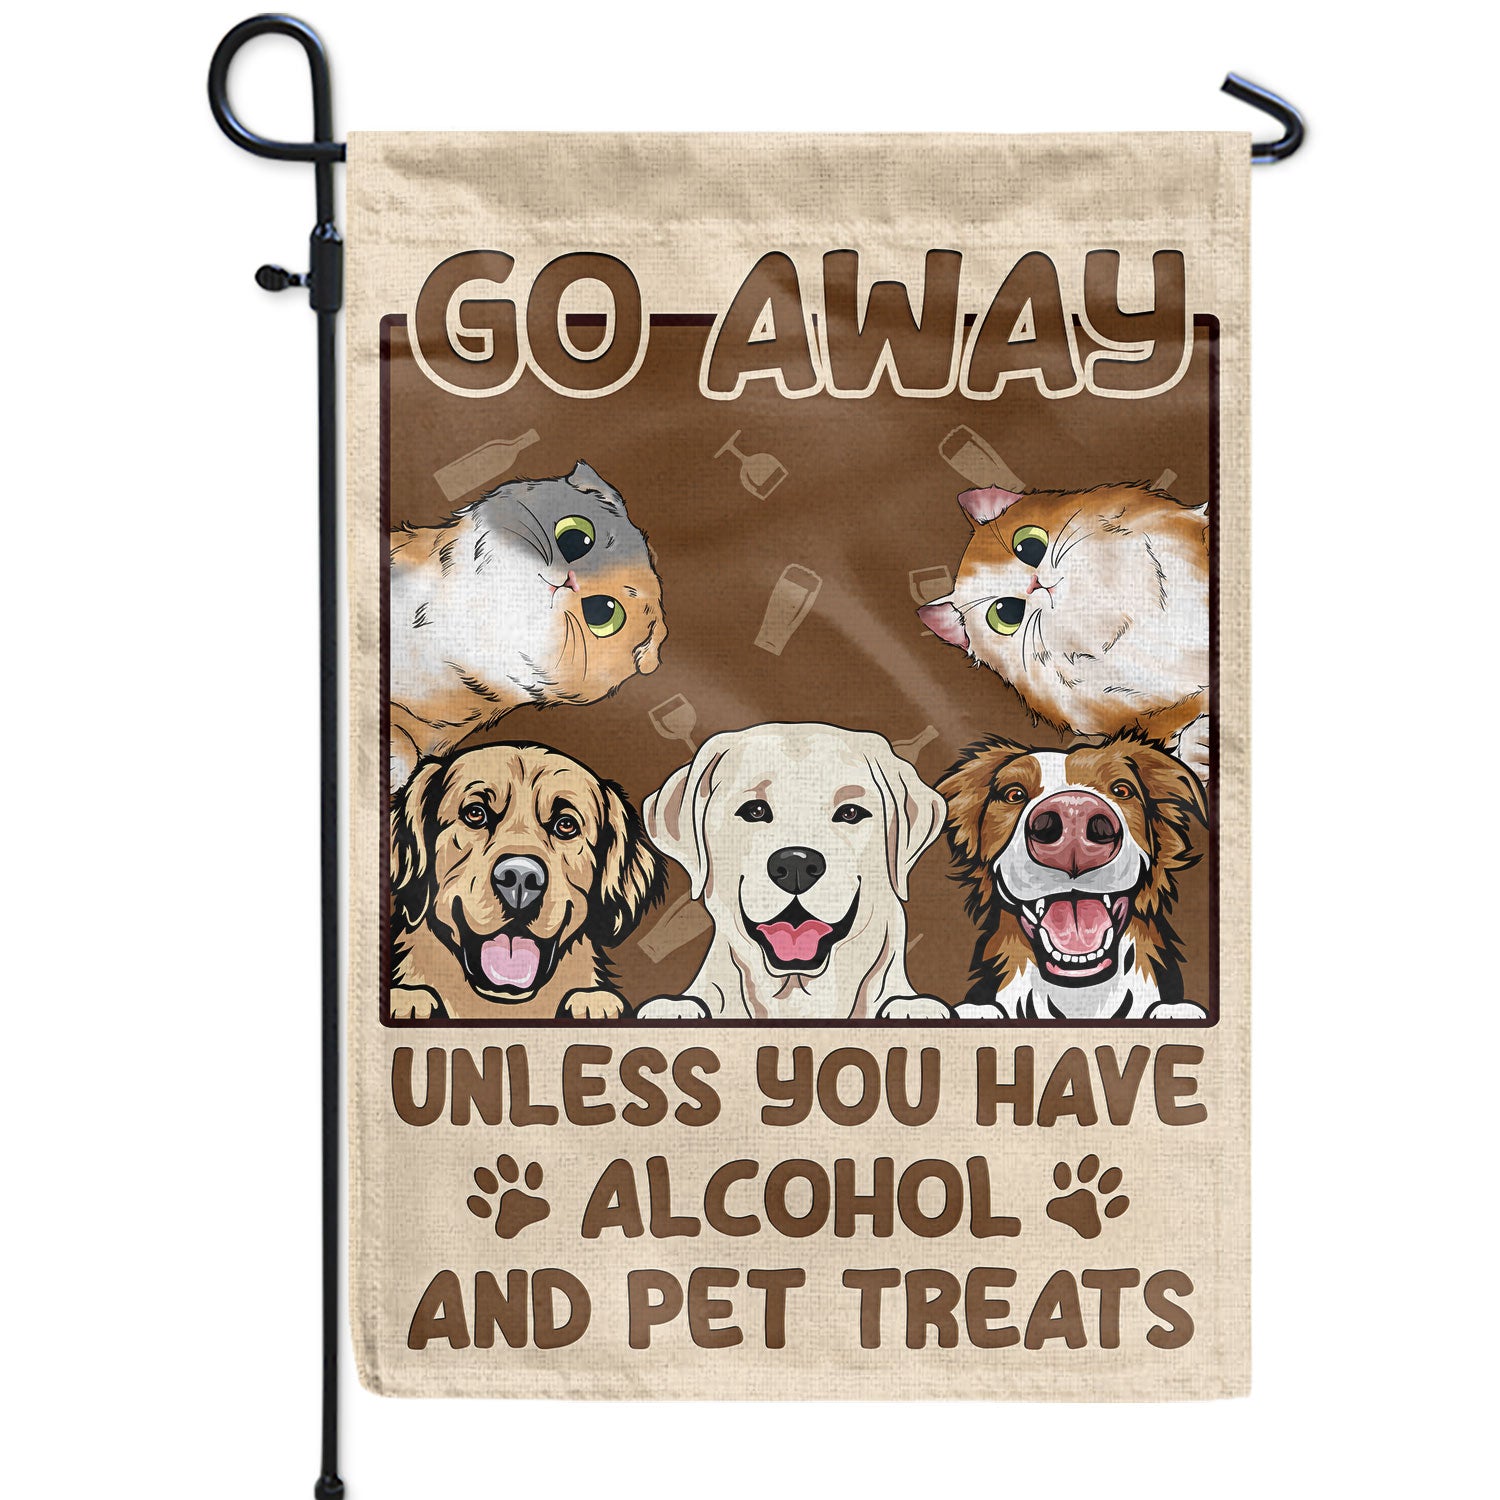 Go Away Unless You Have Alcohol And Dog Treats Cat Treats Pet Treats - Birthday, Housewarming Gift For Dog Lovers & Cat Lovers - Personalized Custom Flag